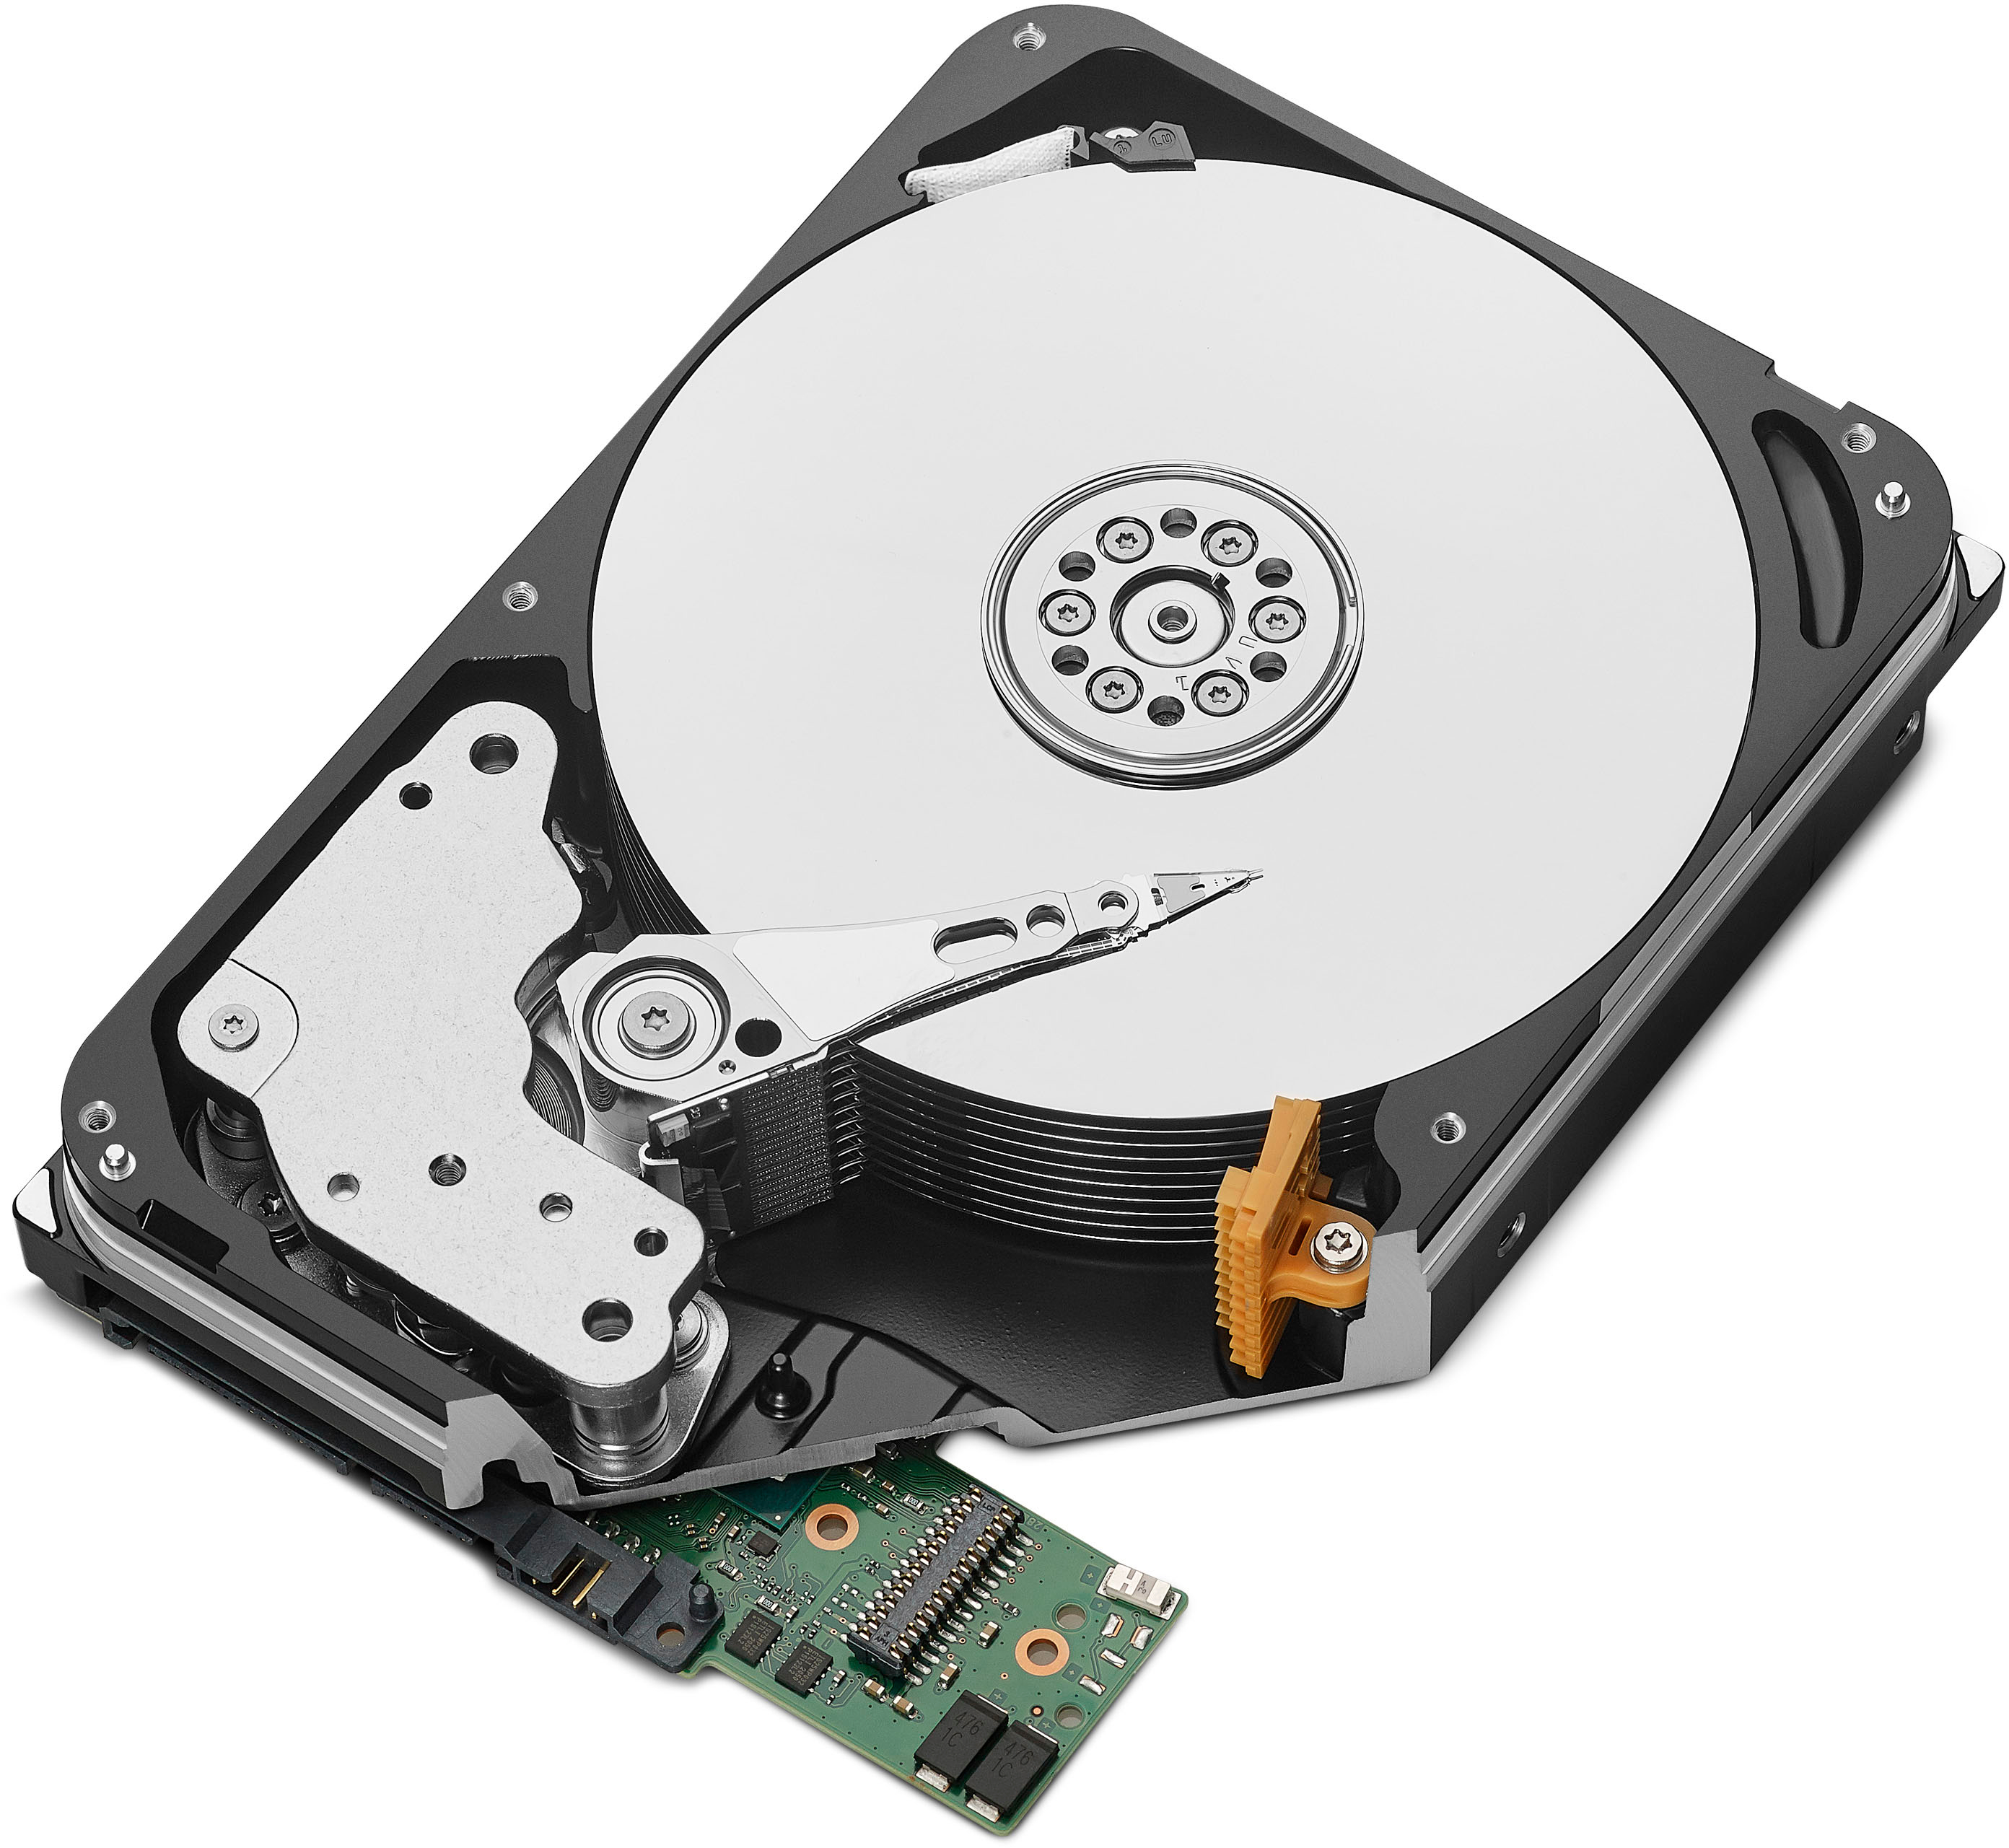 Seagate's new 22TB IronWolf Pro is the company's highest-capacity CMR HDD